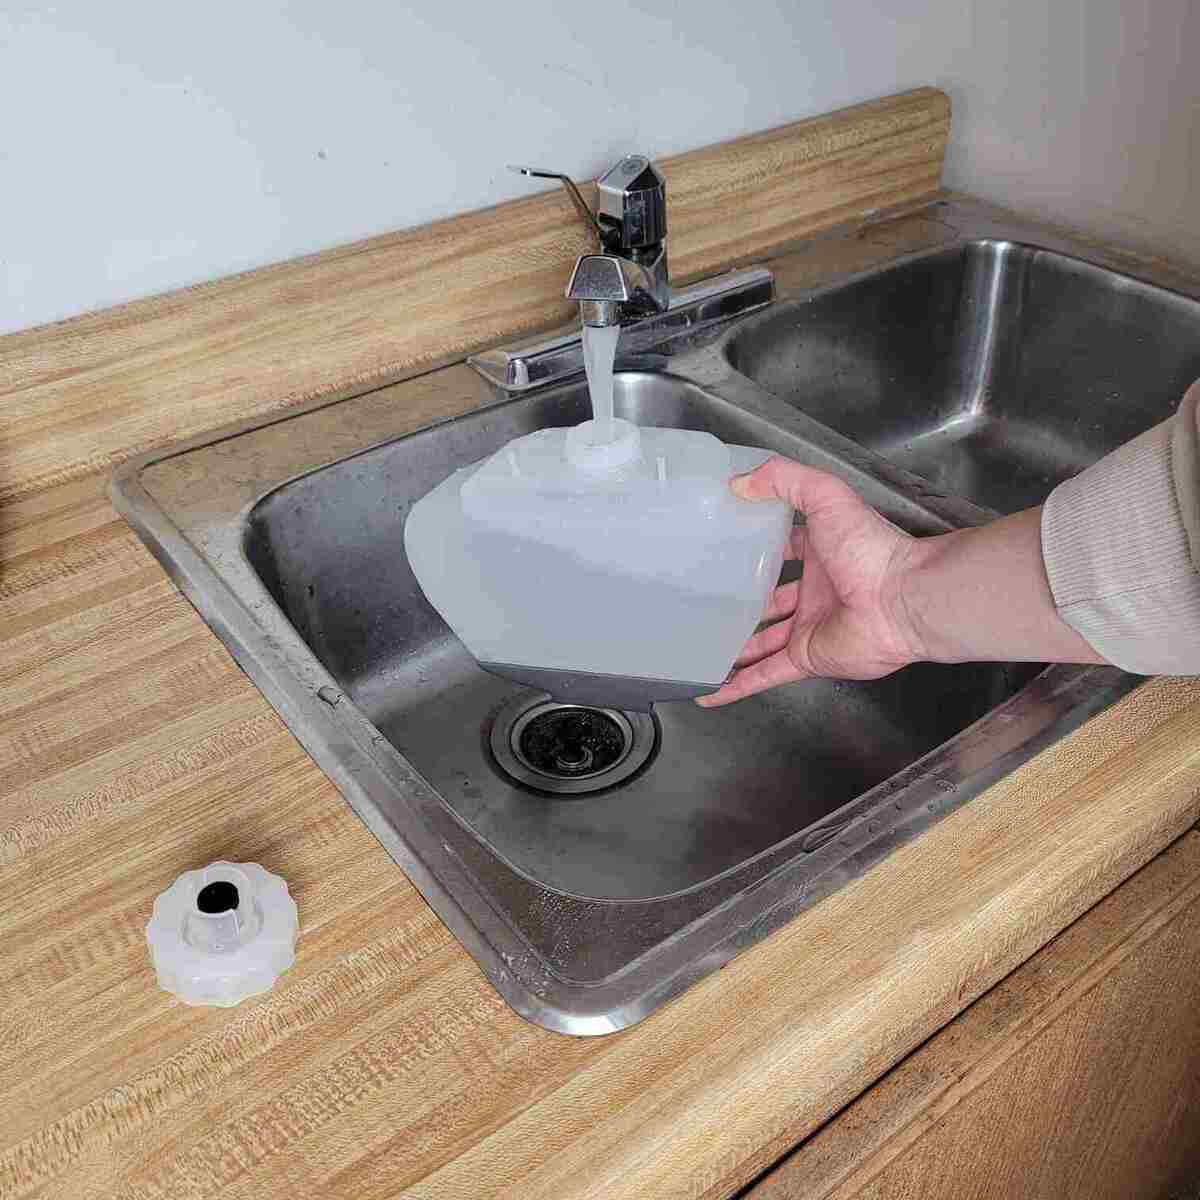 photo of a person filling a steamer's water tank with water in the sink